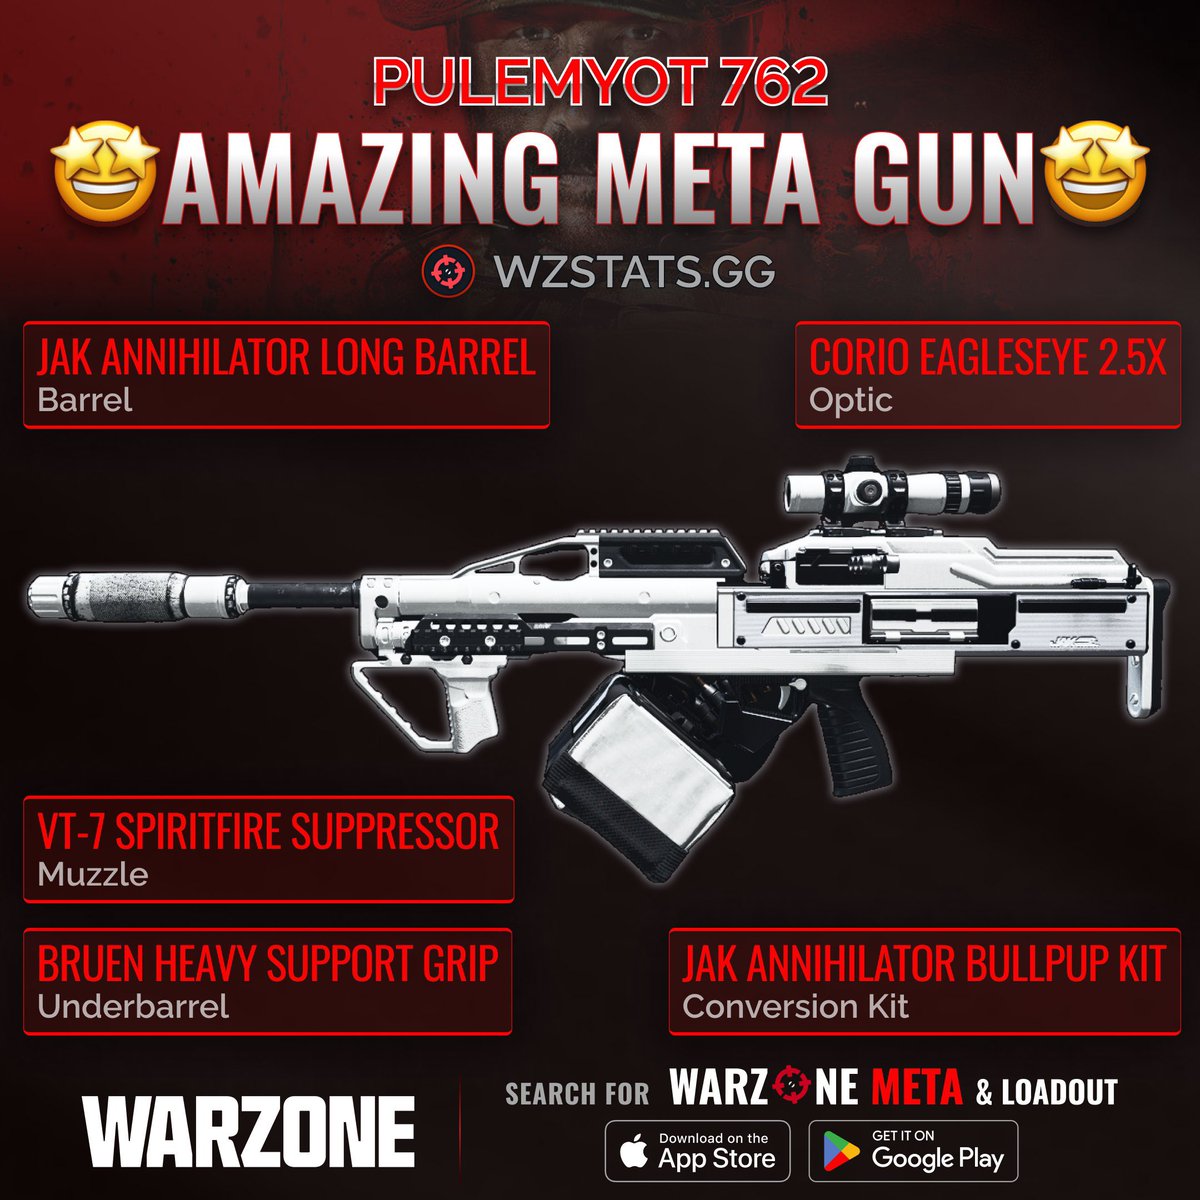 ‼️🚨 META LOADOUT IN WARZONE 🚨‼️

🤩 Puleymot 762 never stopped being AMAZING in #Warzone! 💯

✅ Great TTK
✅ Super Fast TTK with 1 Neck or Headshot
✅ Very Low Recoil
✅ Good Mobility
✅ Very High Damage Per Mag

Only beaten by DG-58, especially if you dont like the SVA Burst!